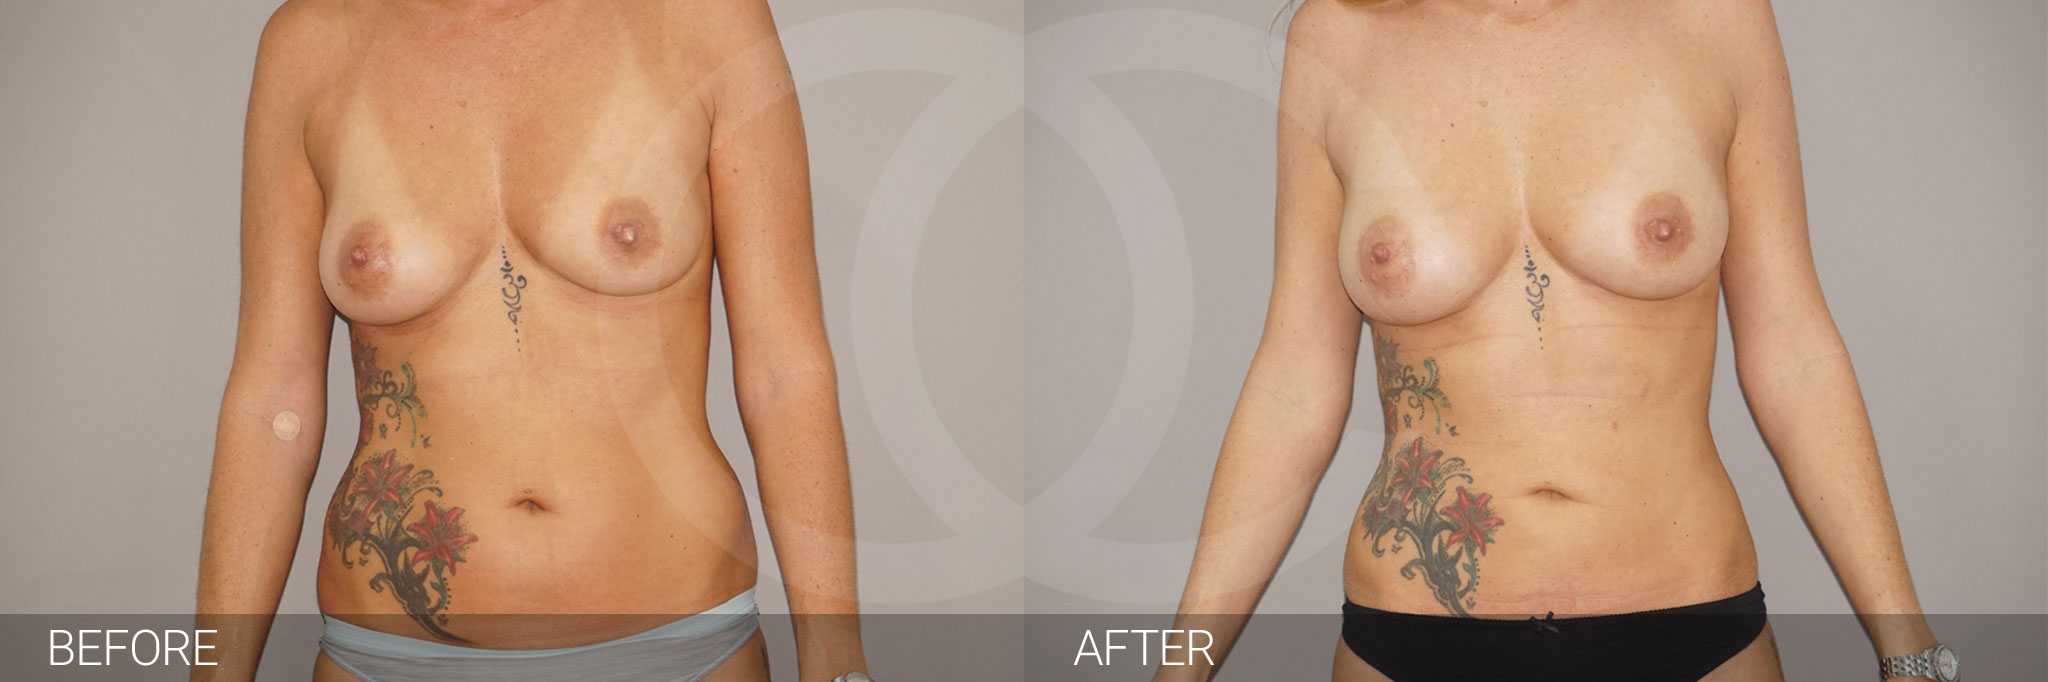 Breast Augmentation with Fat Transfer ante/post-op I